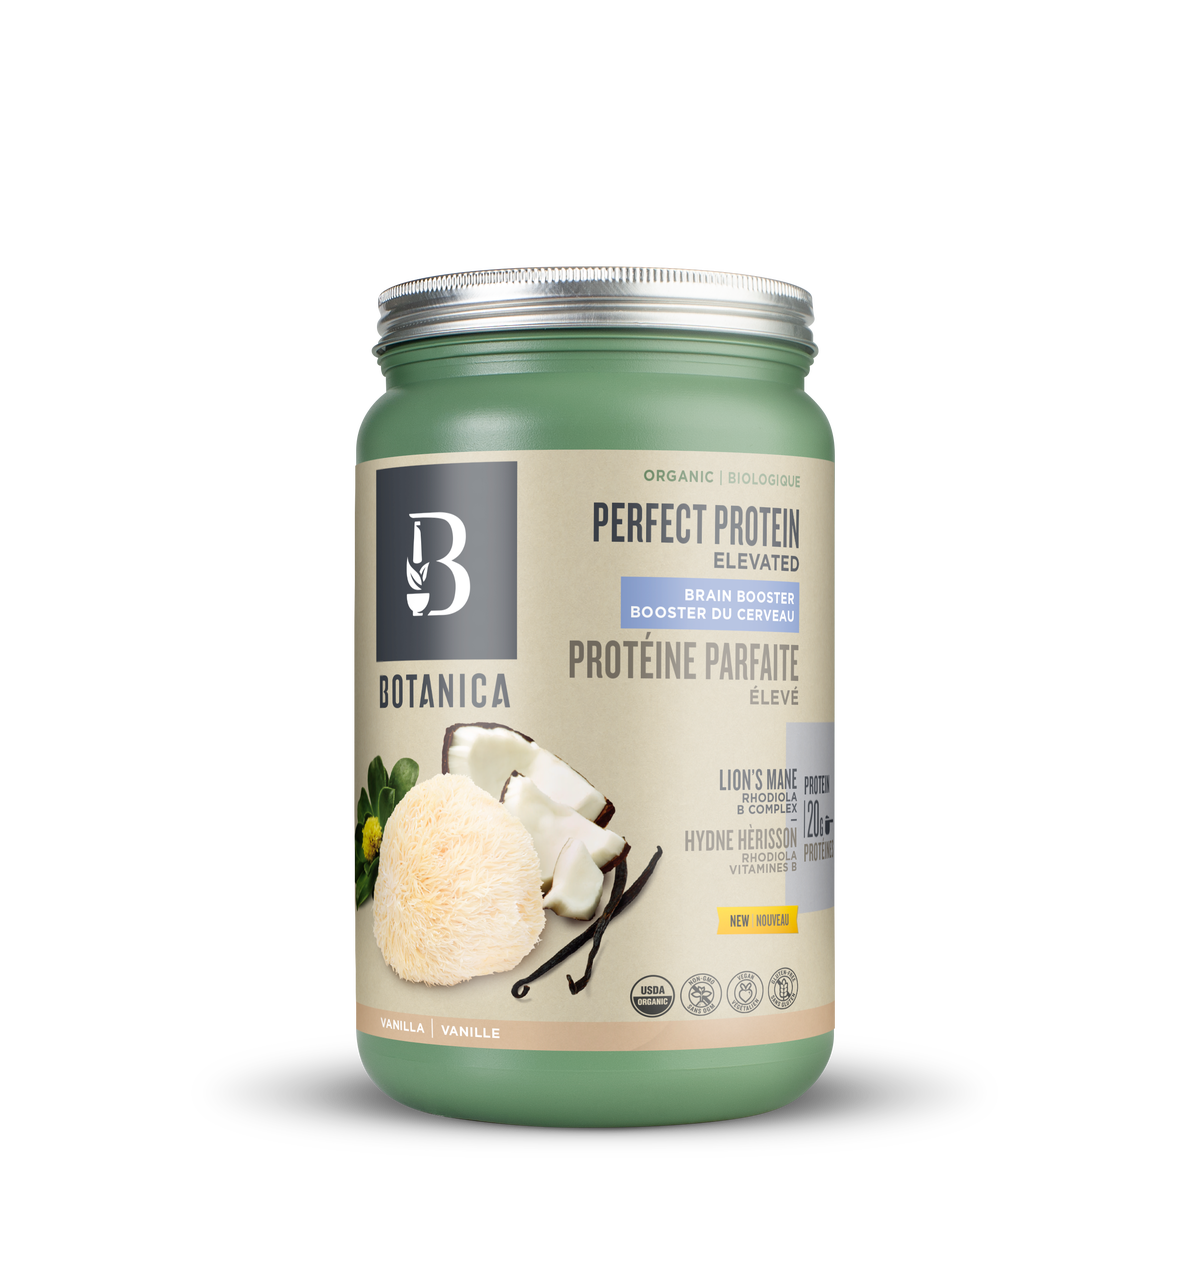 Botanica Perfect Protein Elevated Brain Booster (606g) - Lifestyle Markets